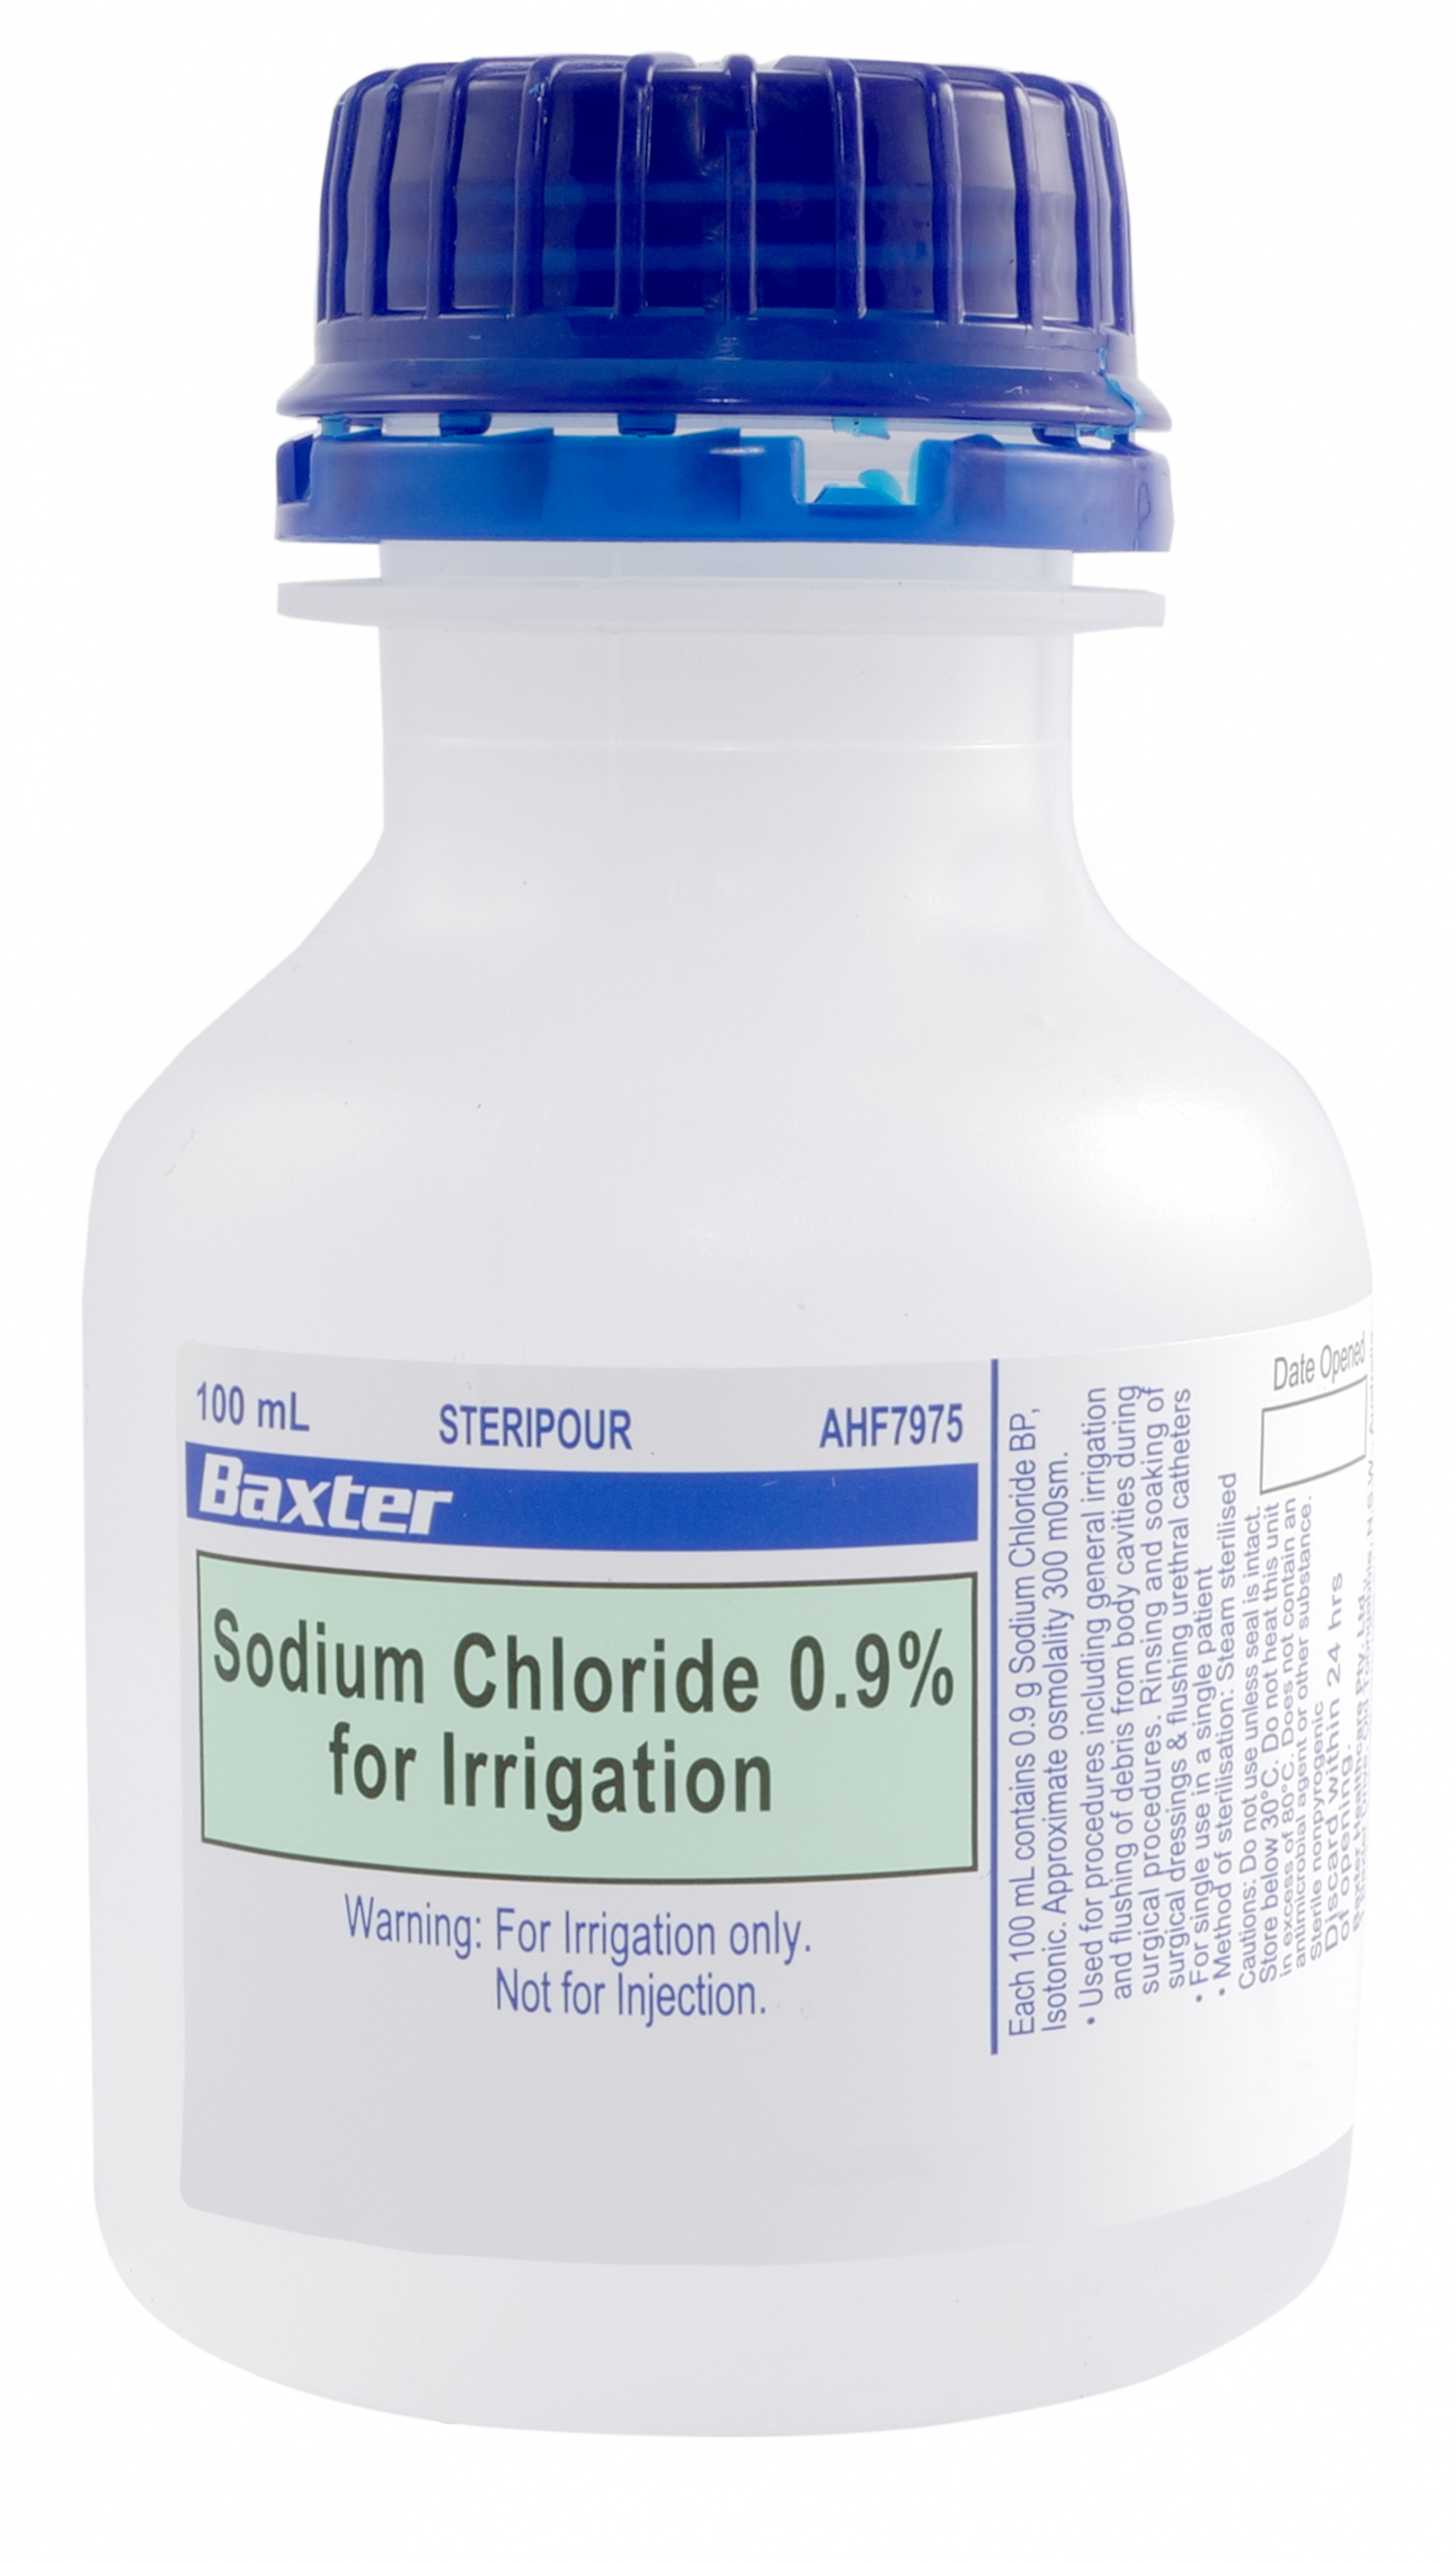 Sodium Chloride 0.9% Steripour Irrigation 100mls image 0